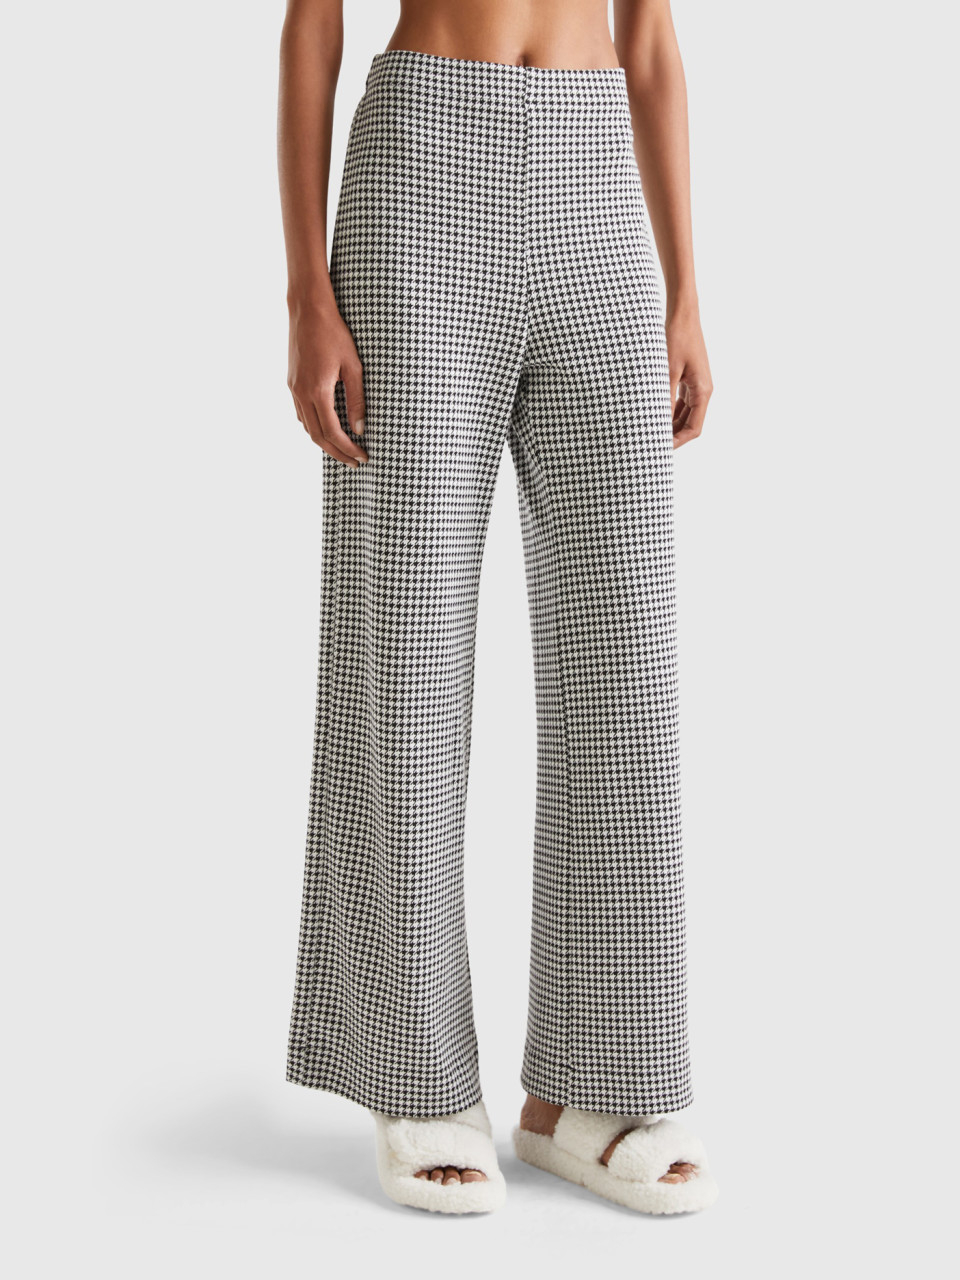 Benetton, Palazzo Houndstooth Trousers, Multi-color, Women